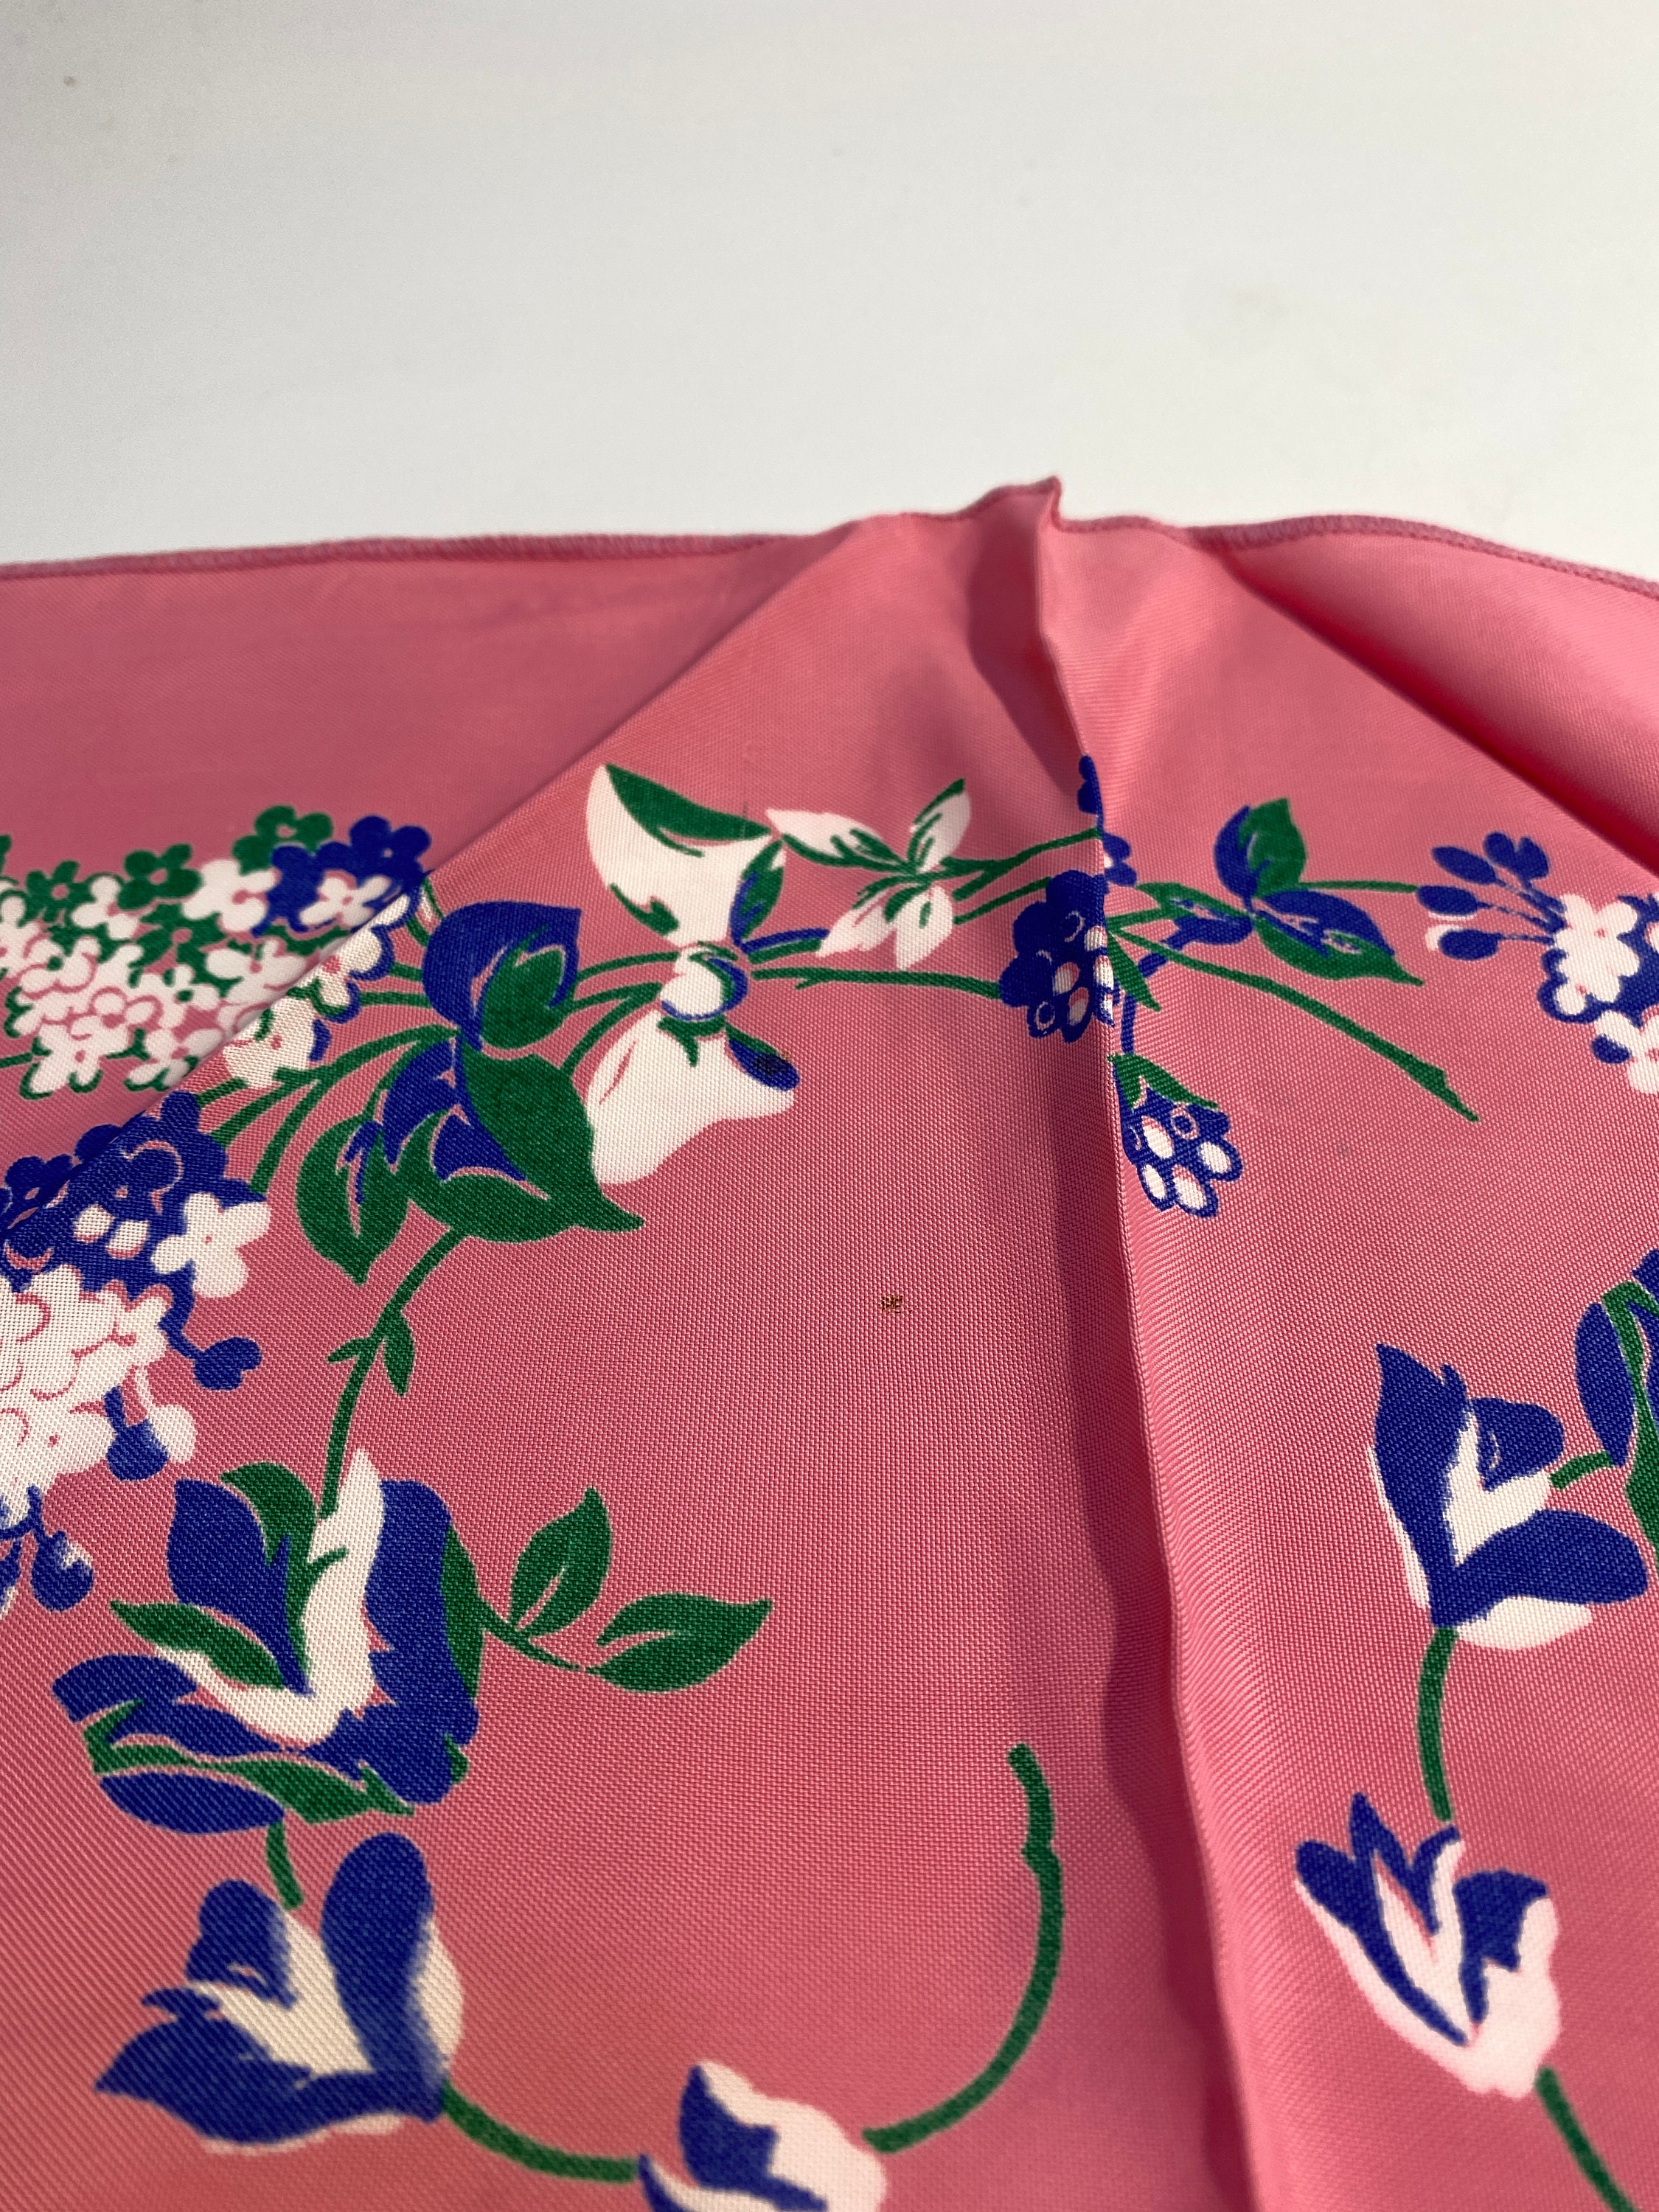 Vintage Pink With Blue and White Flowers Handkerchief 12 - Etsy